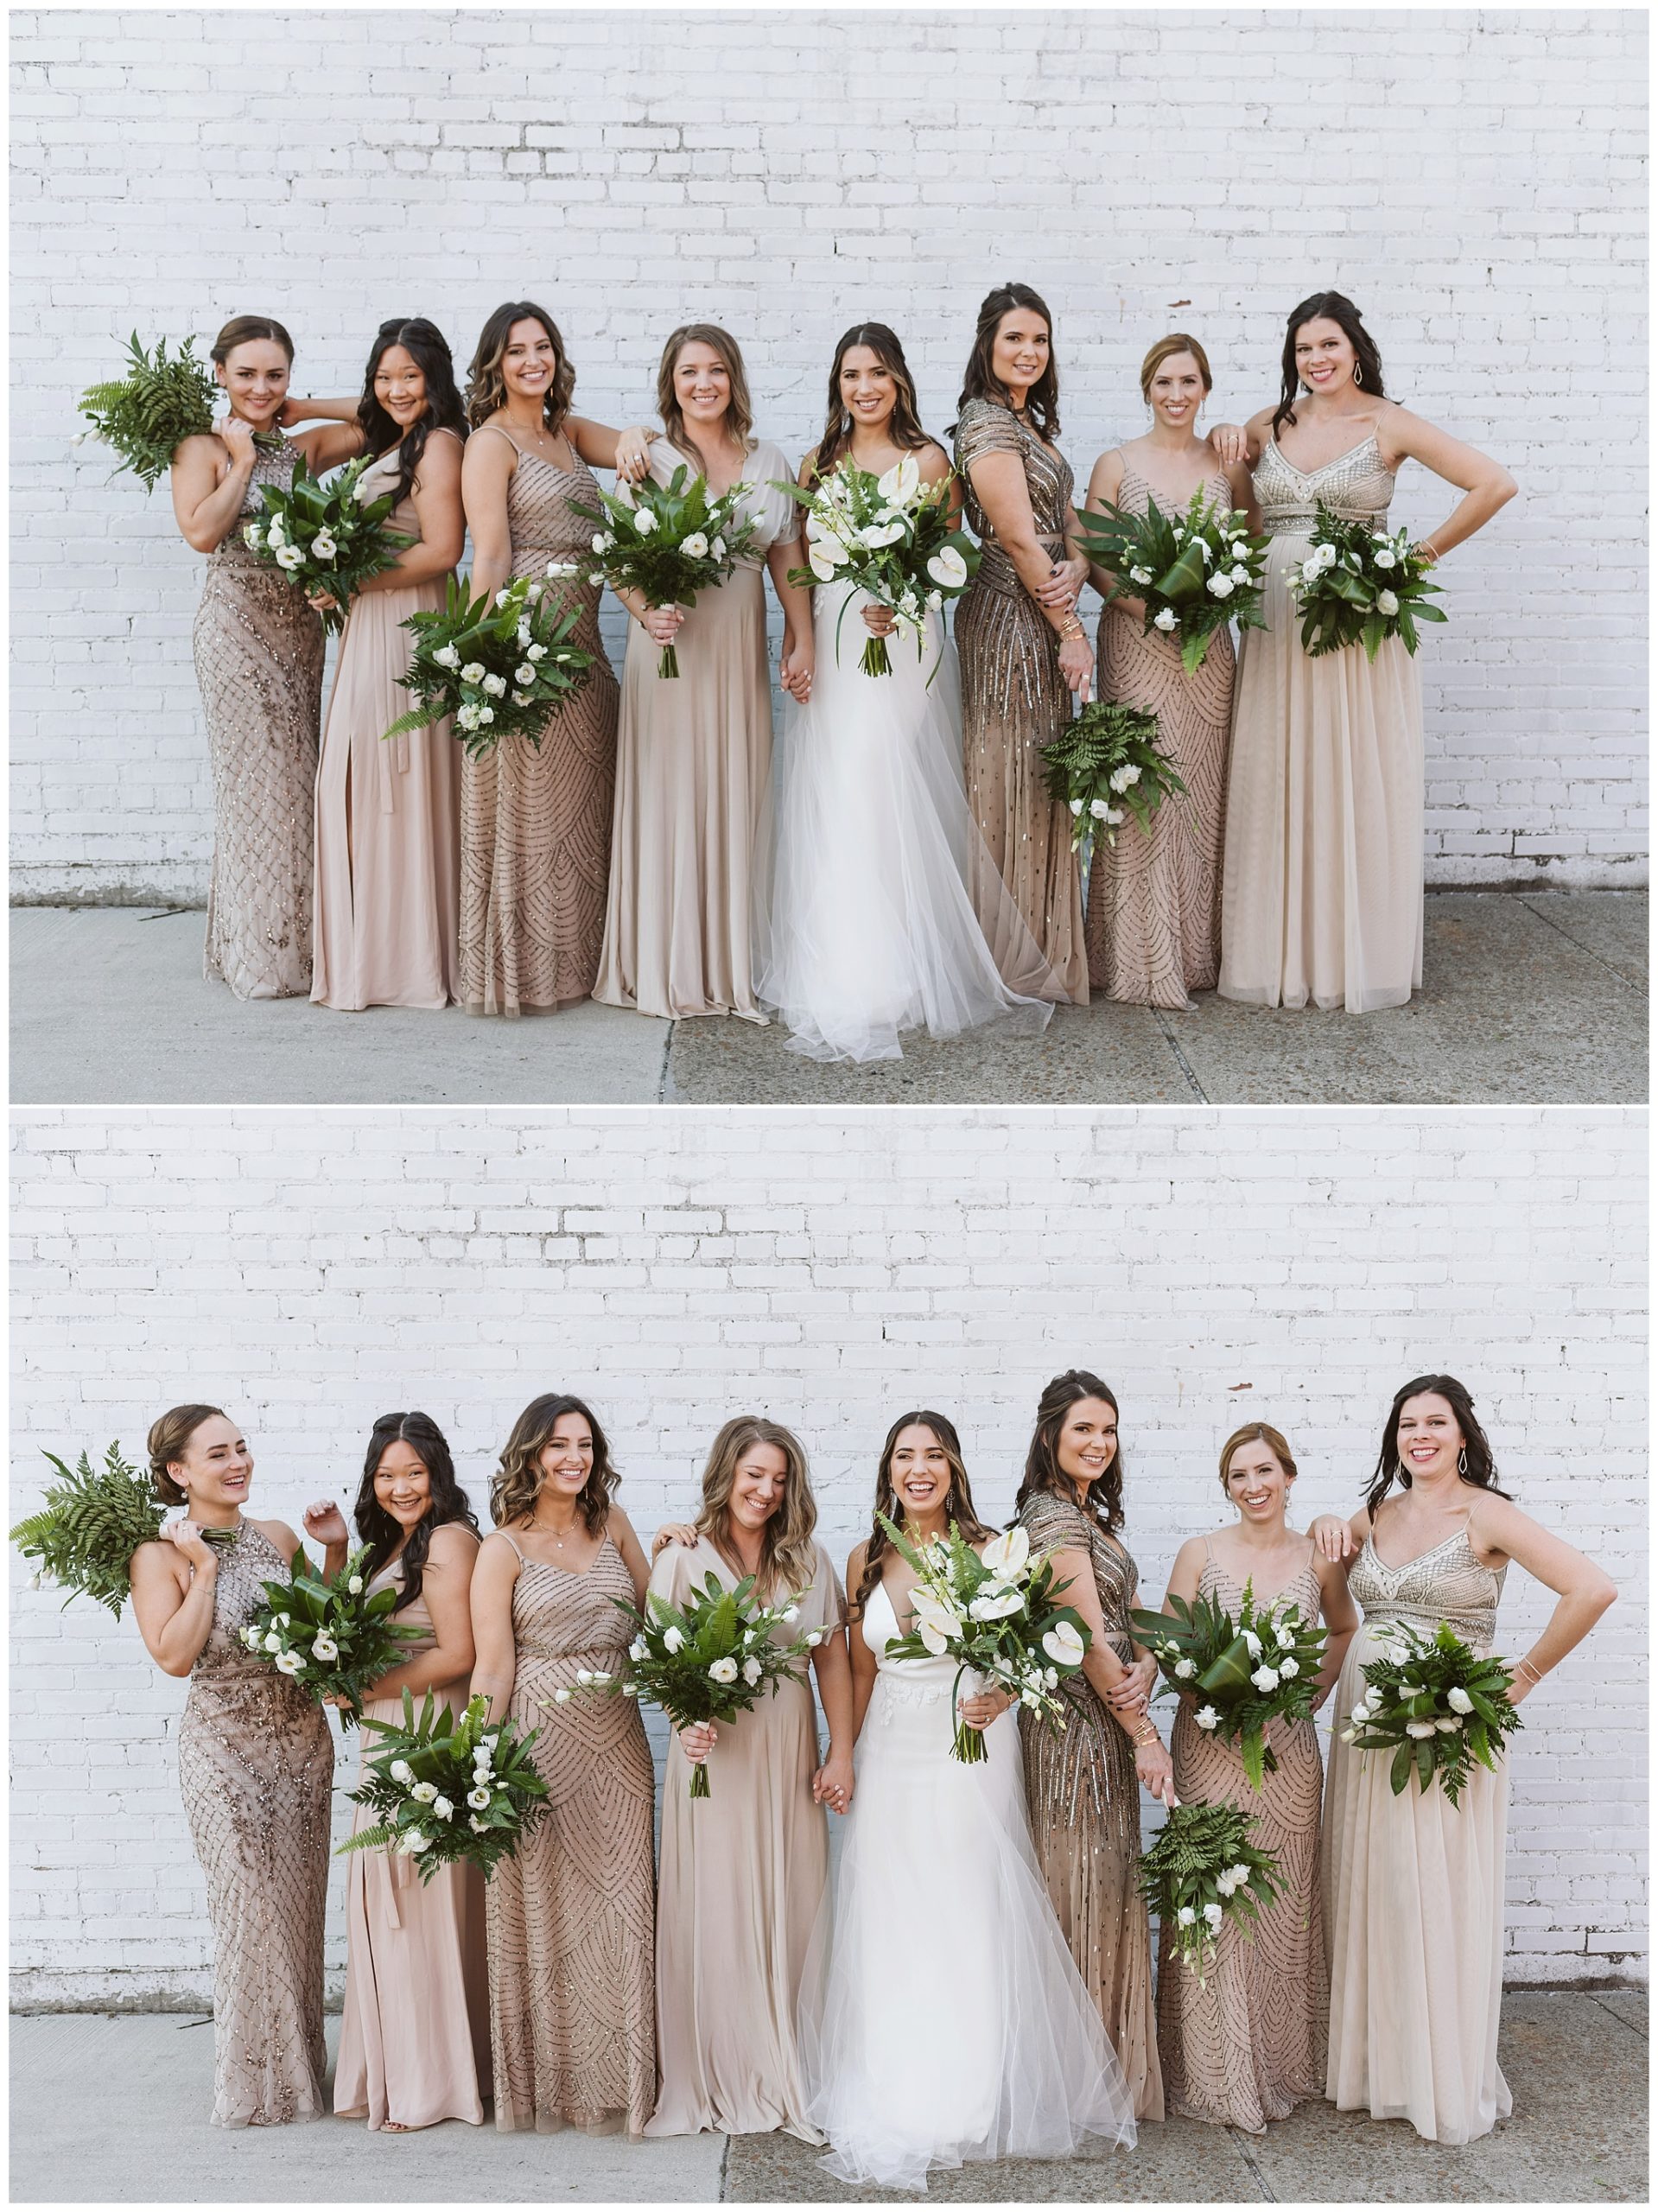 Bride and bridesmaids posing in front of white wall